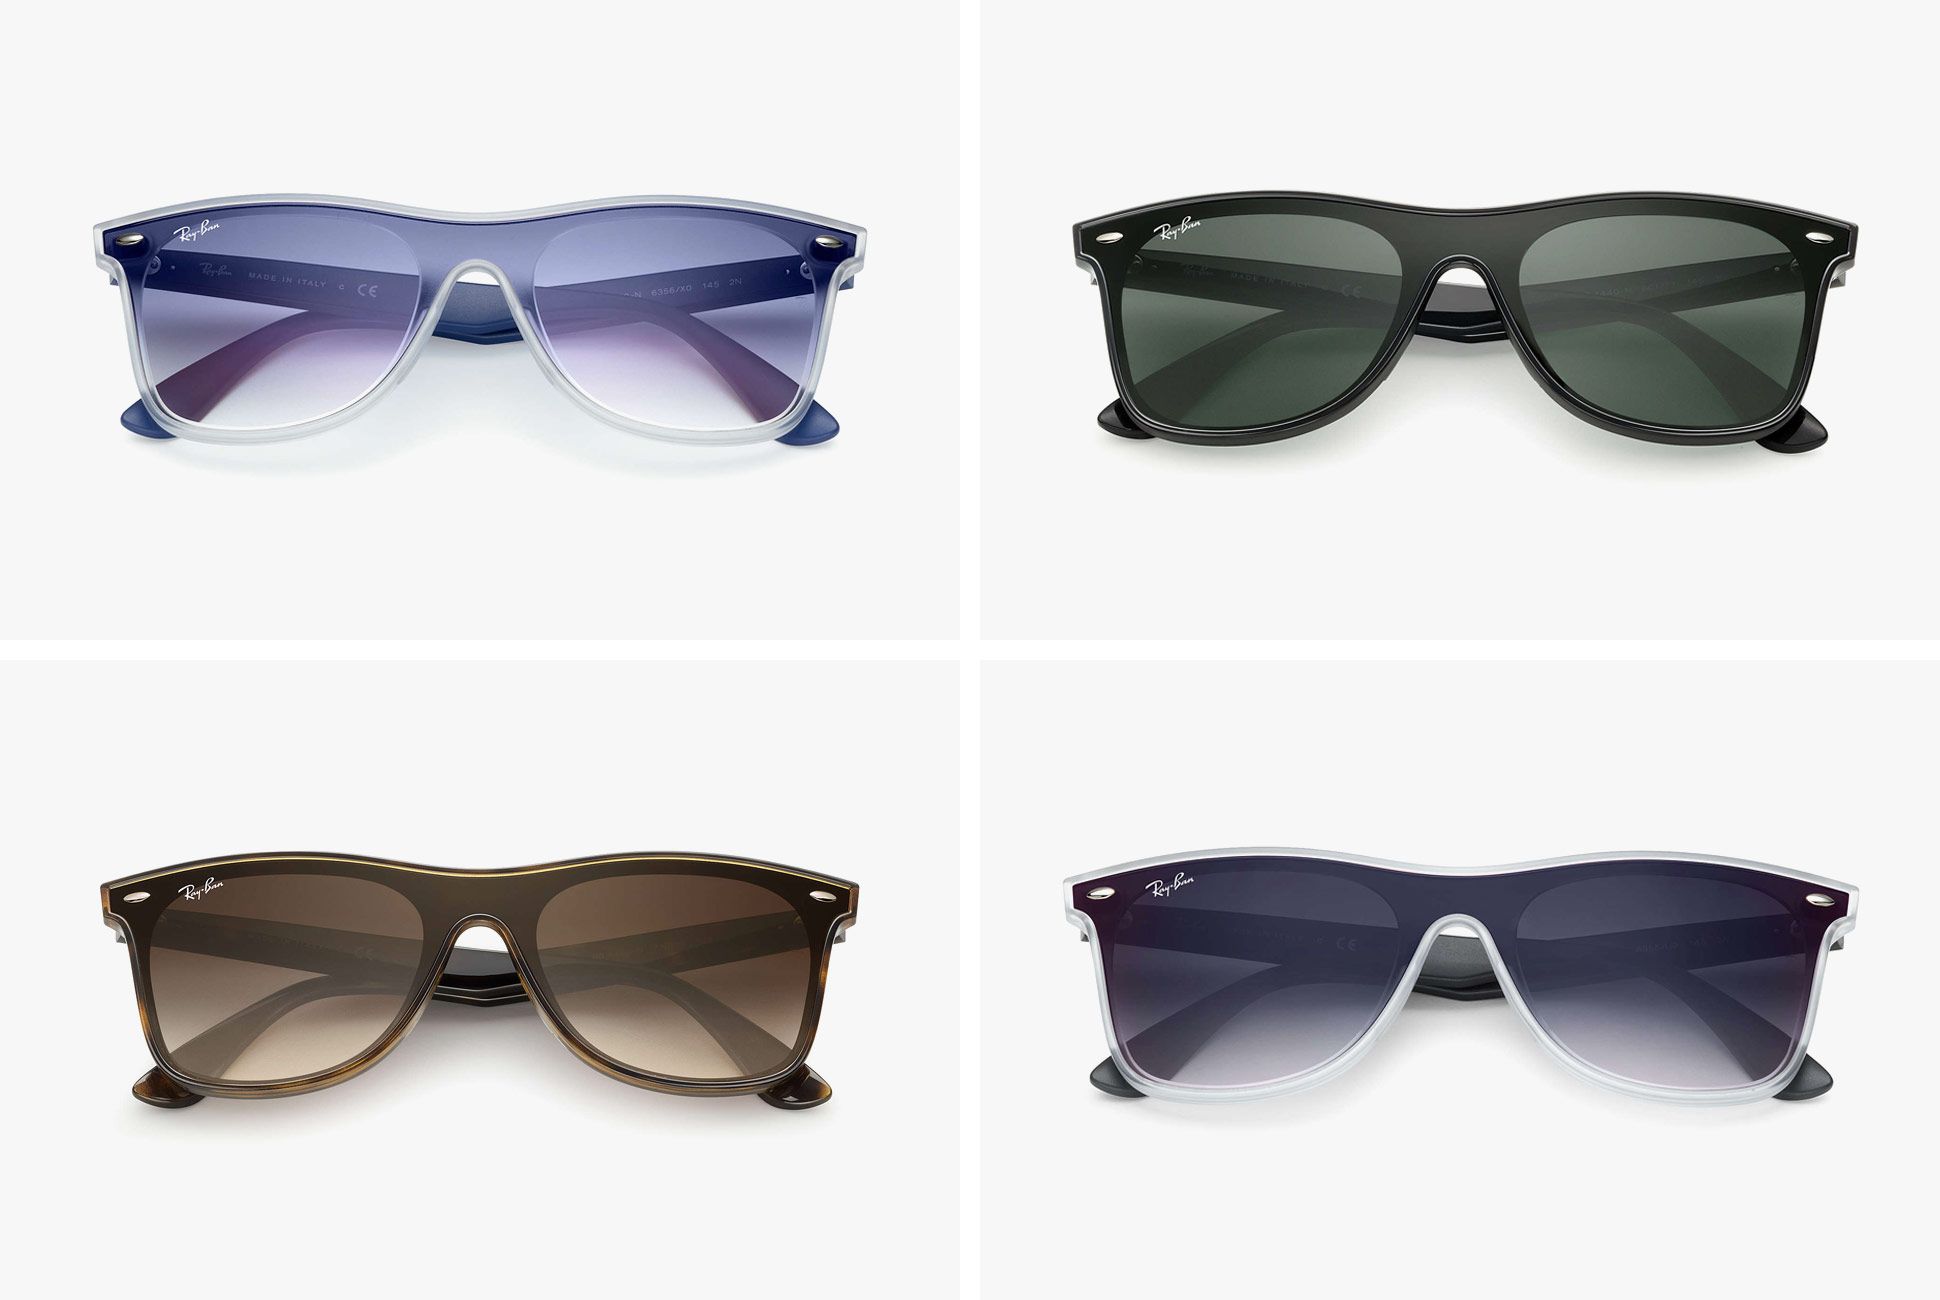 Ray-Ban Updated the Iconic Wayfarer and the Results Are, Well, Questionable